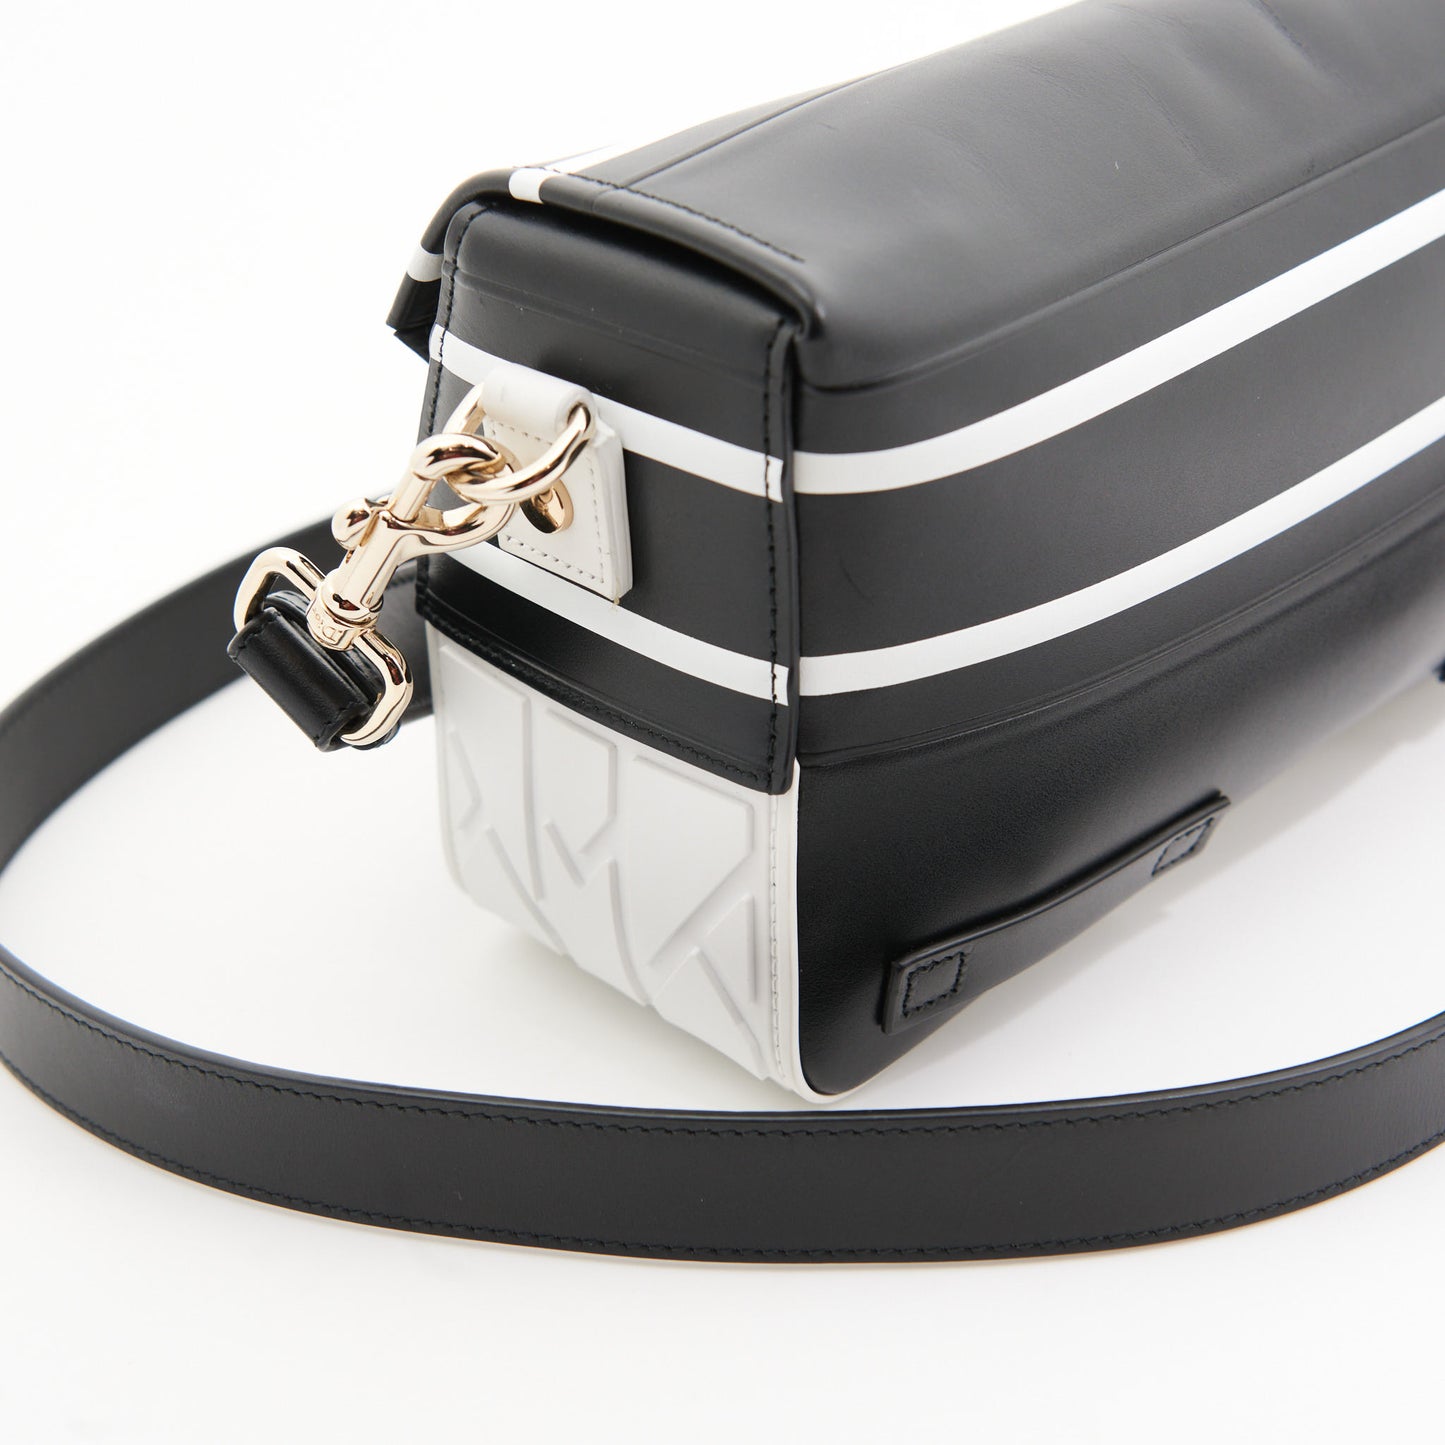 Christian Dior Leather Campbag in Black and White